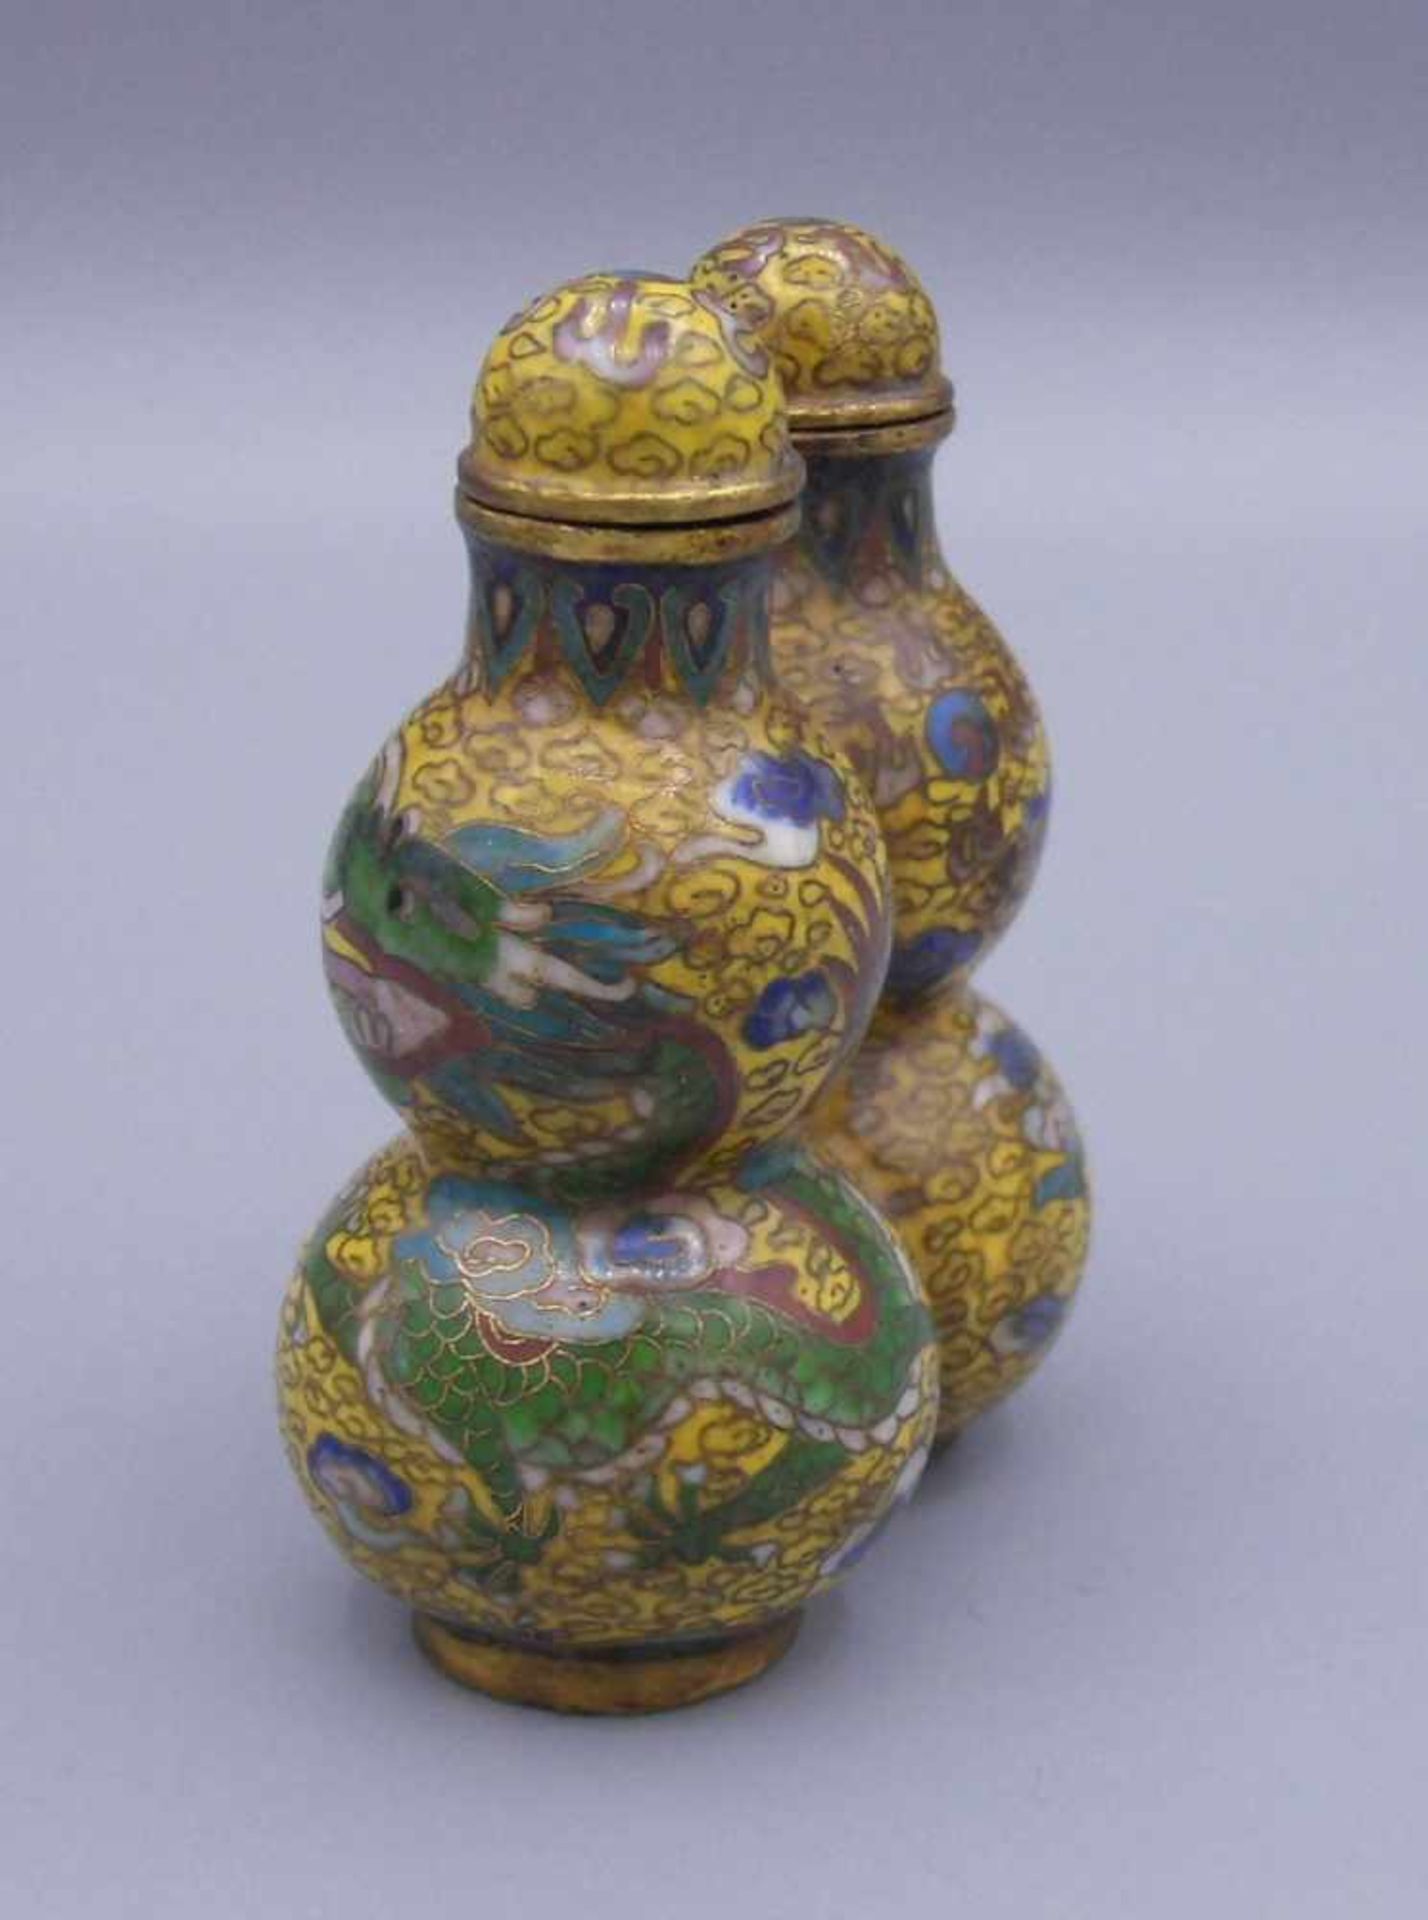 CLOISONNÉ - SNUFFBOTTLE / DOPPEL-SCHNUPFTABAKBEHÄLTER, China, Emaille über Messing. Doppel- - Image 2 of 7